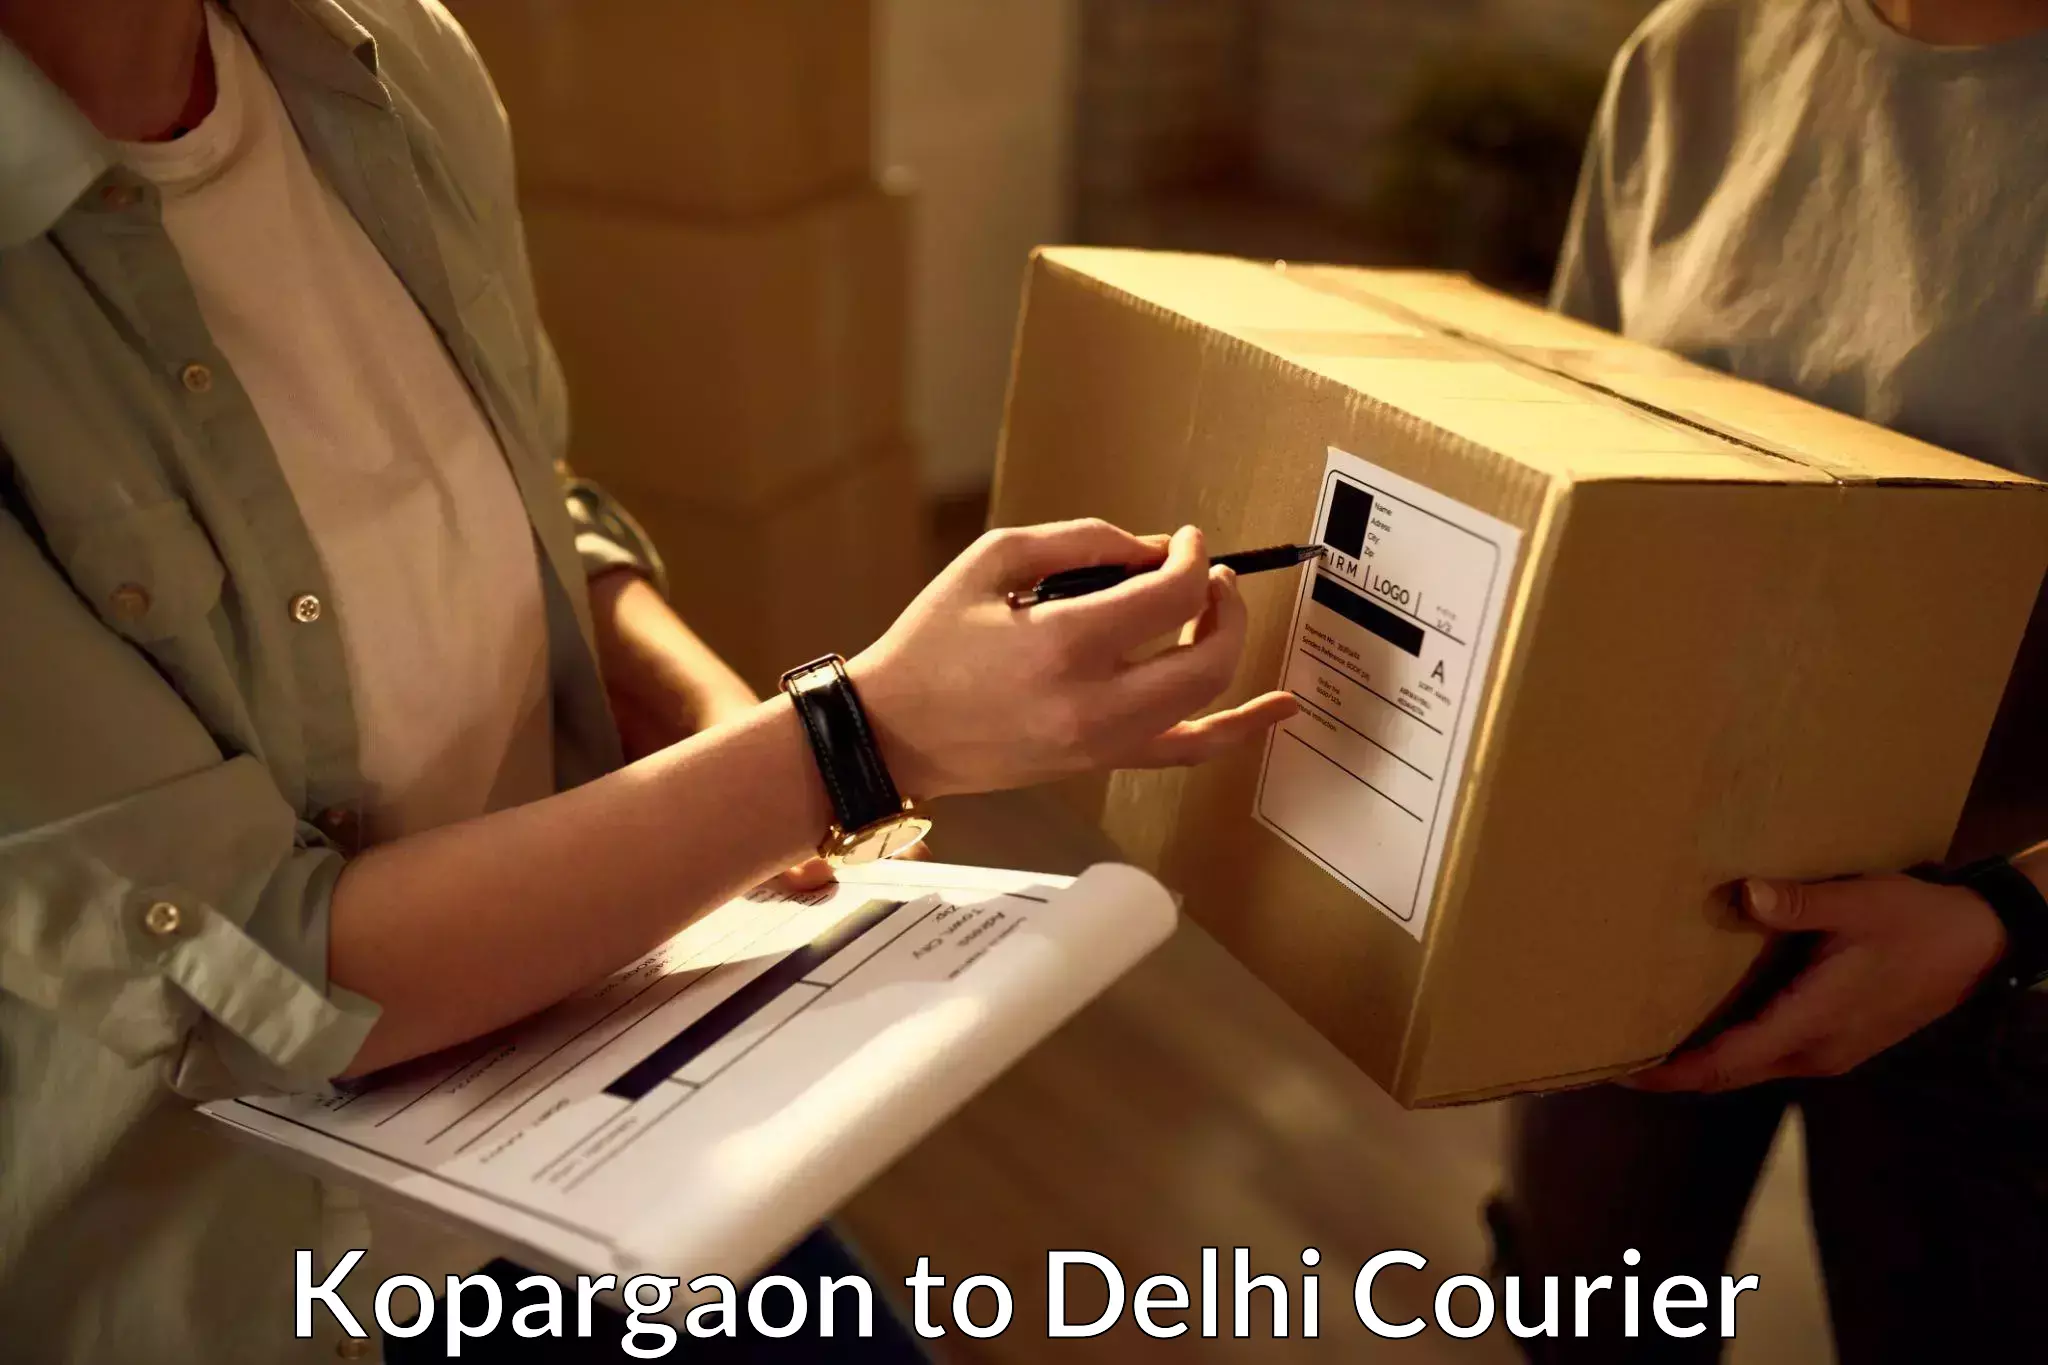 Fast delivery service Kopargaon to NCR